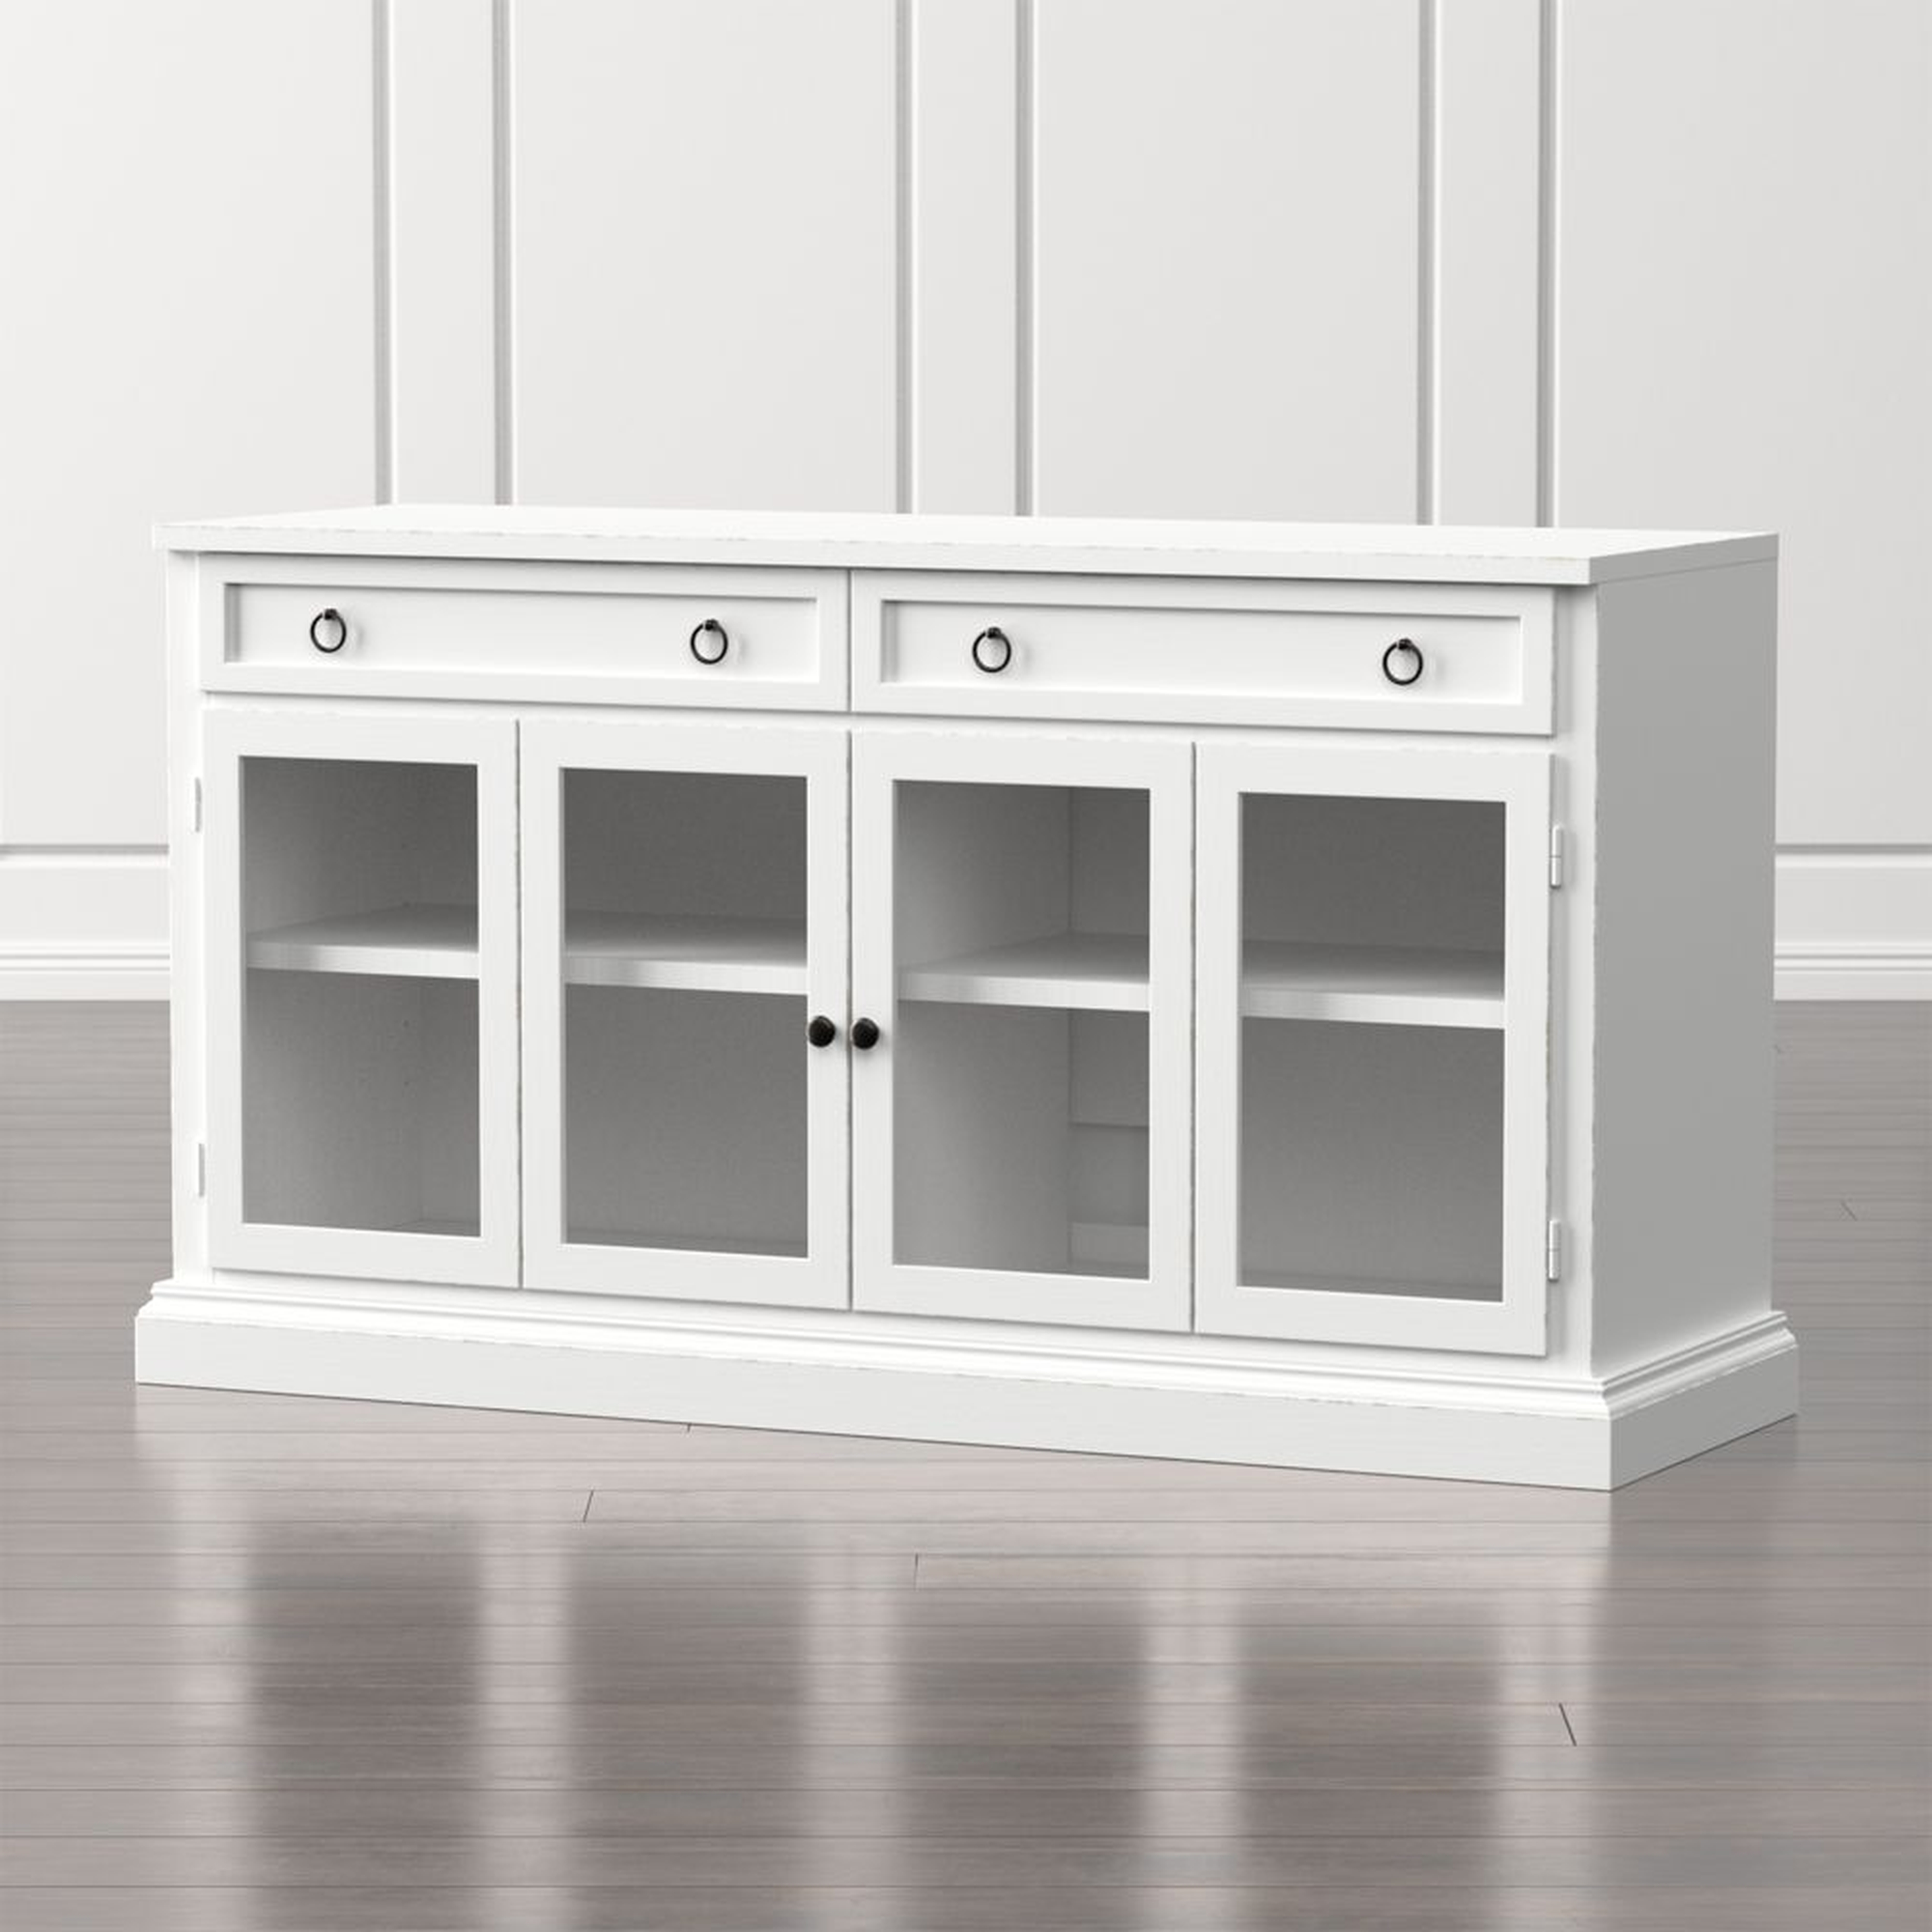 Cameo 62" White Modular Media Console with Glass Doors- backordered until June - Crate and Barrel